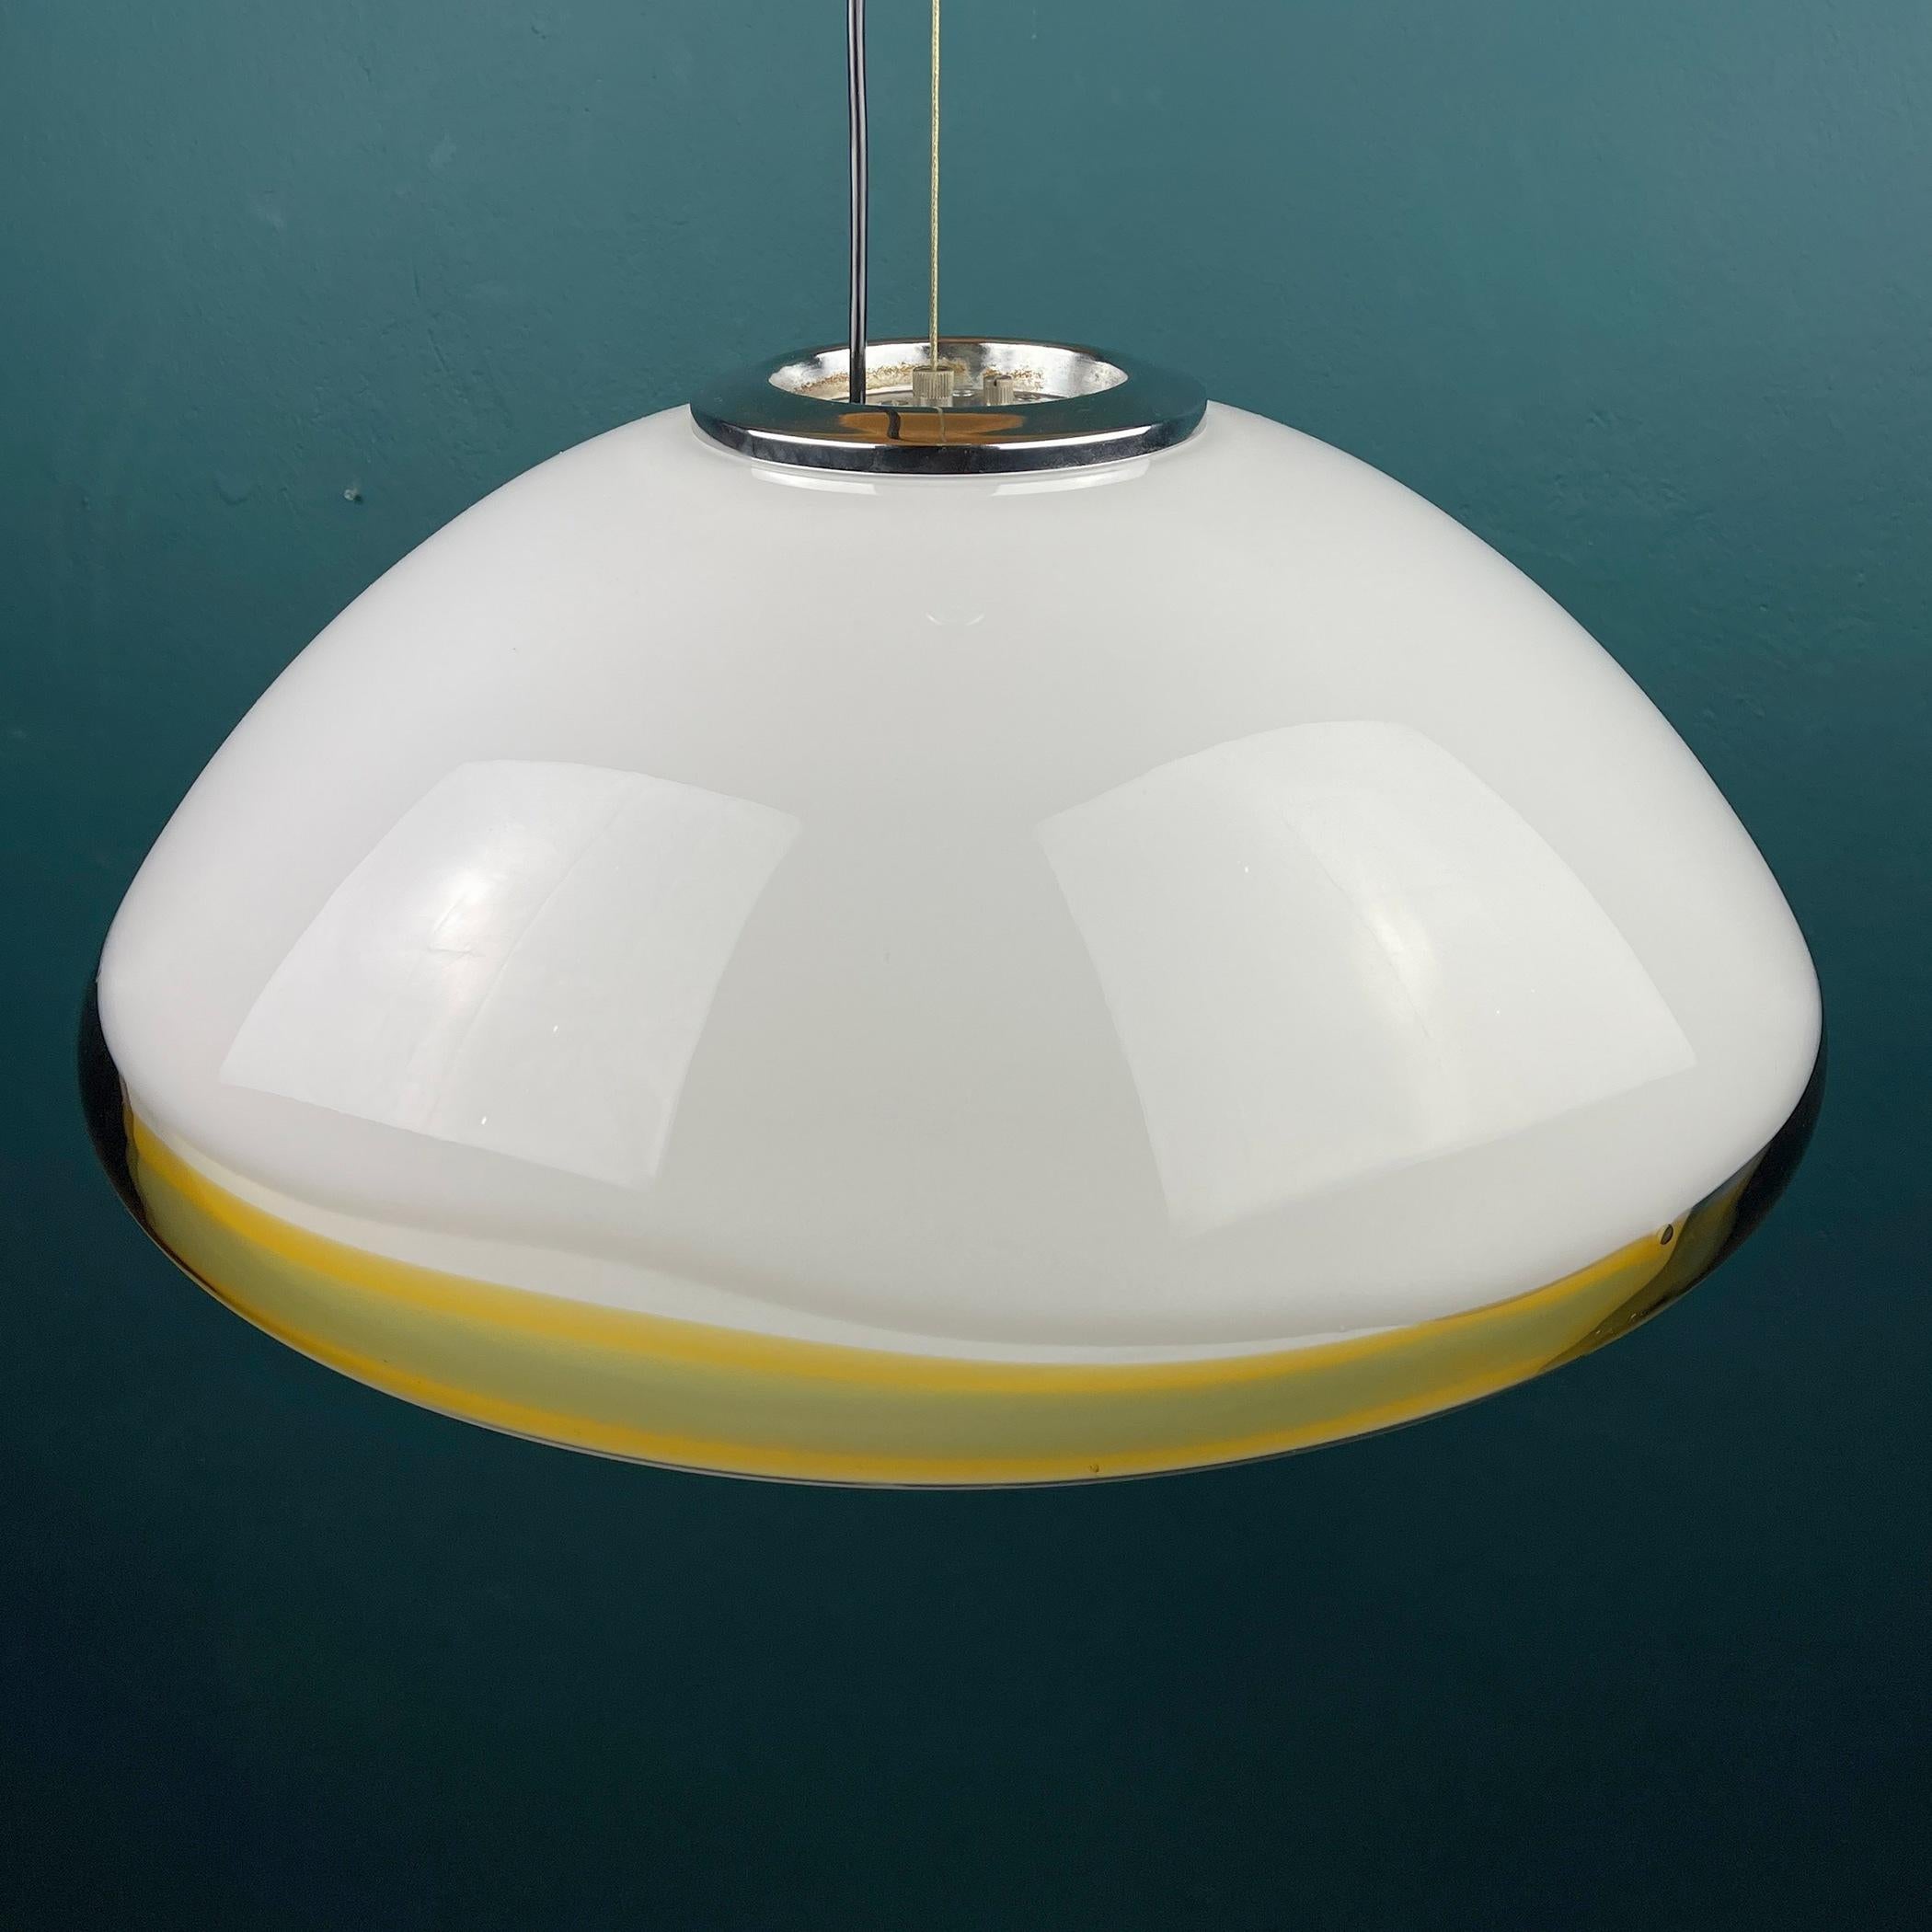 Very unusual vintage large Murano glass pendant lamp made in Italy in the 1970s. The lamp is equipped with a metal base. Milky white glass is beautifully complemented by yellow-green edging. Thanks to the drawing, the lamp creates truly magical